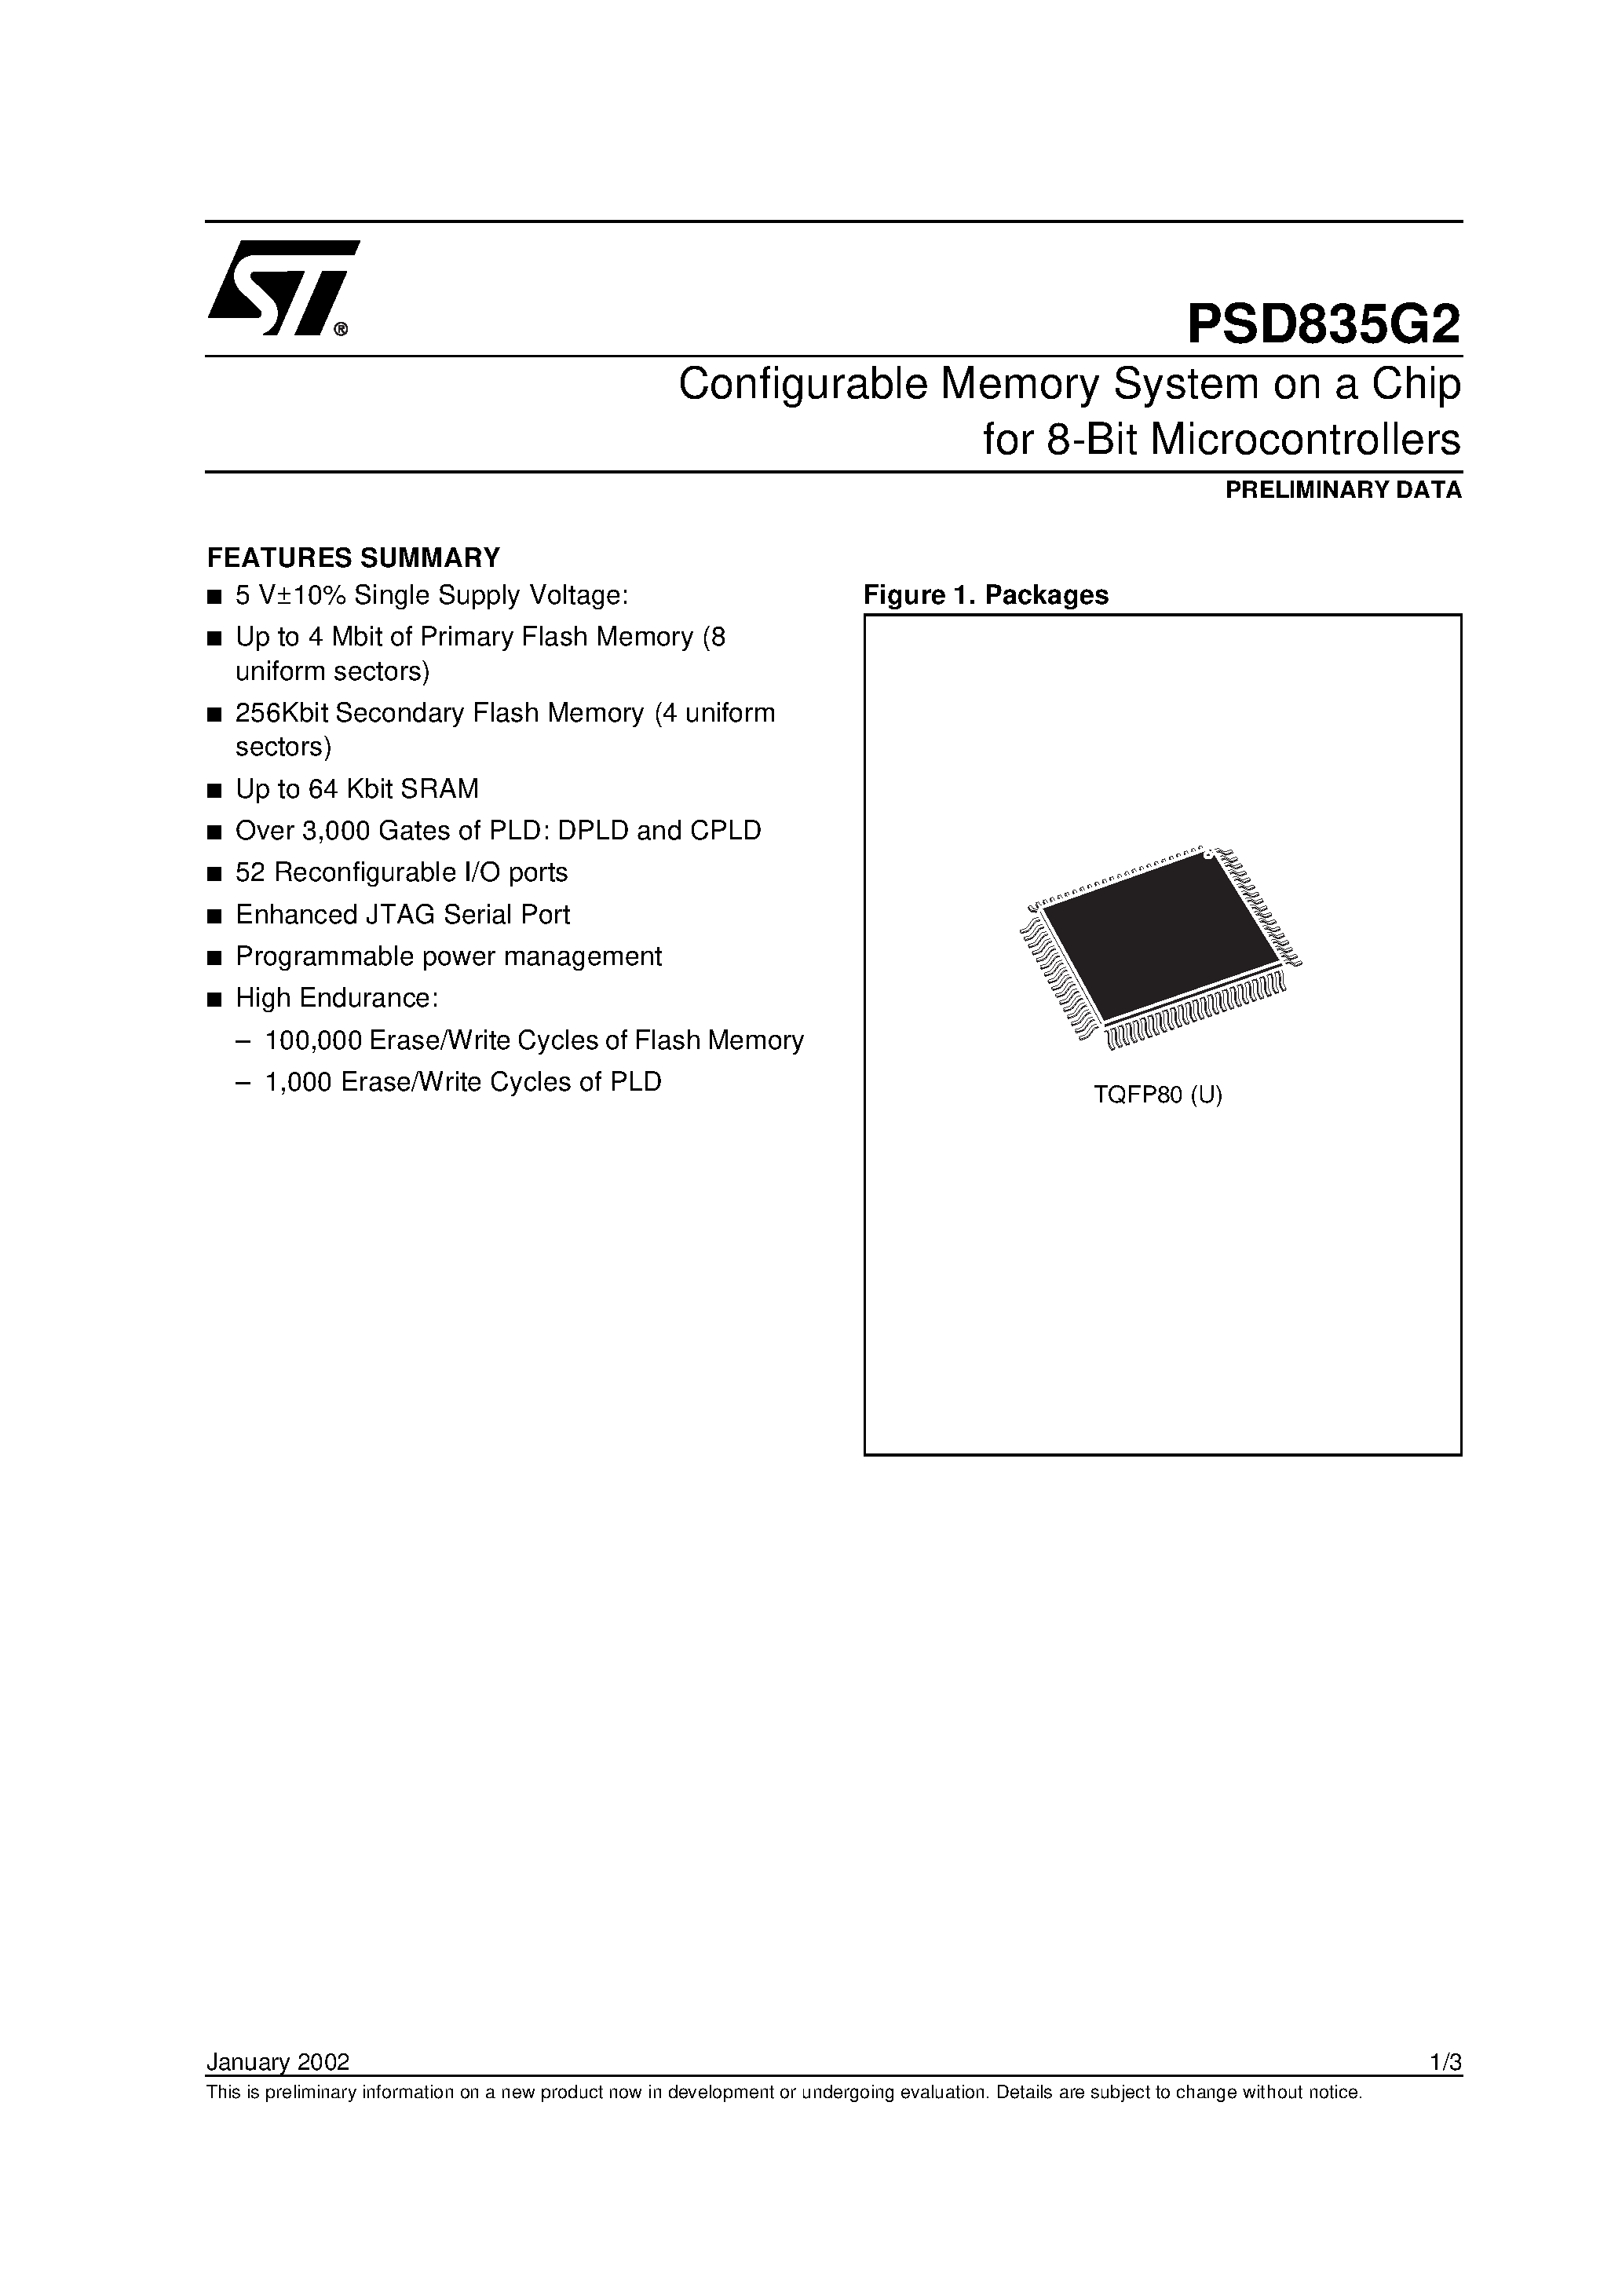 Datasheet PSD835F1-A-90M - Configurable Memory System on a Chip for 8-Bit Microcontrollers page 1